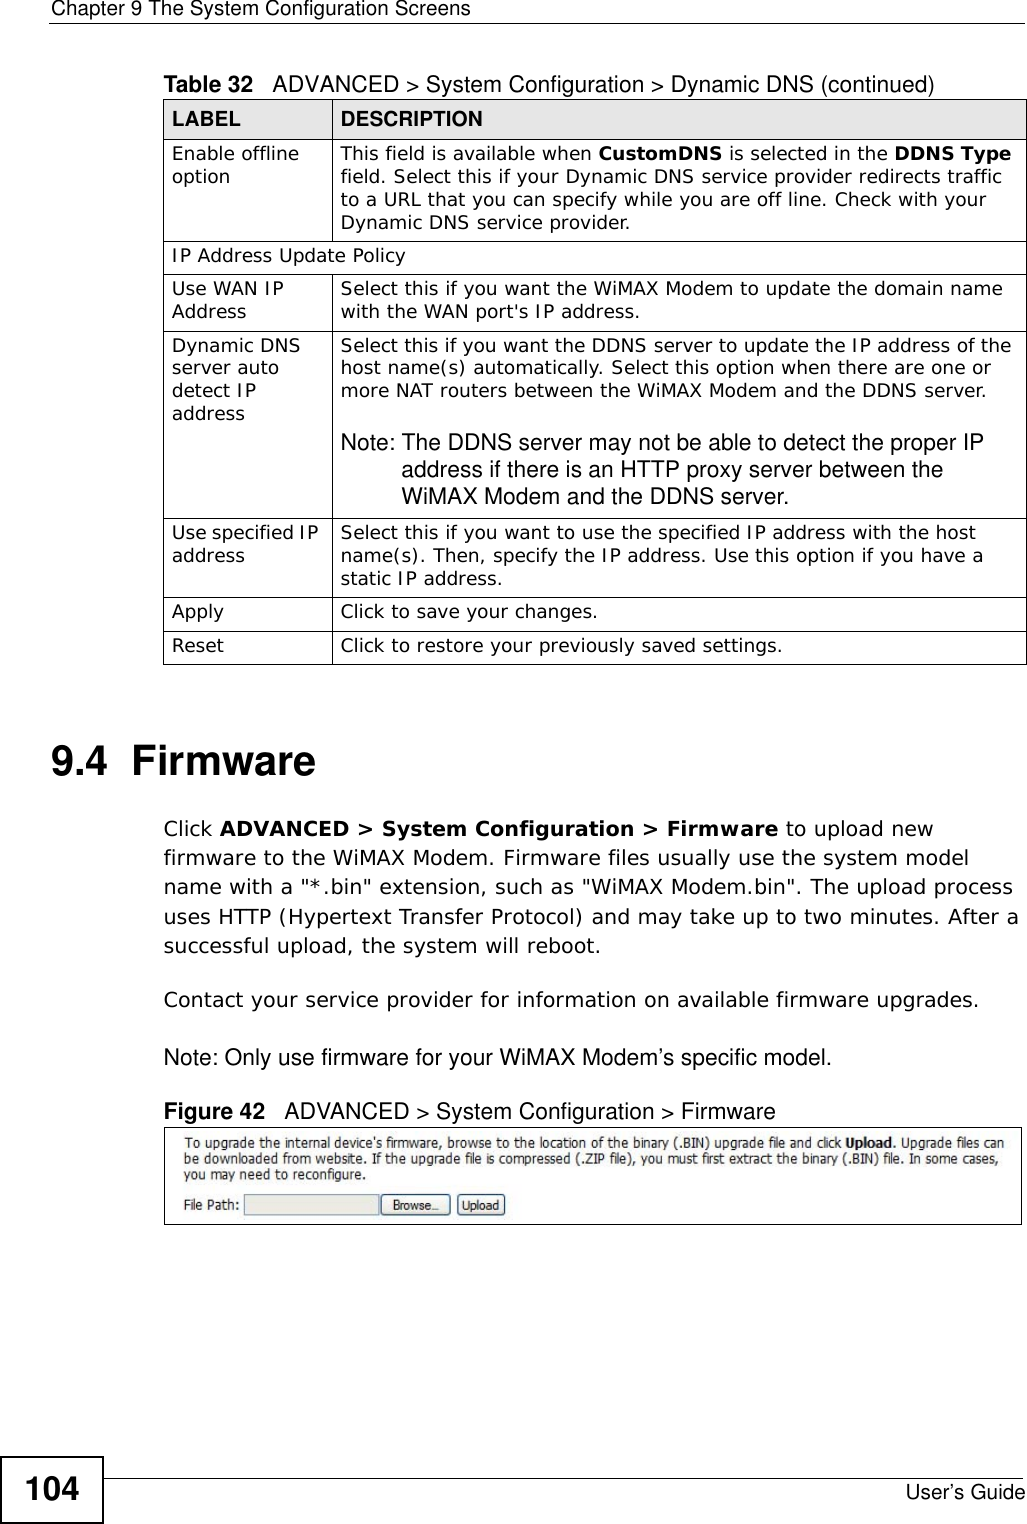 Chapter 9 The System Configuration ScreensUser’s Guide1049.4  FirmwareClick ADVANCED &gt; System Configuration &gt; Firmware to upload new firmware to the WiMAX Modem. Firmware files usually use the system model name with a &quot;*.bin&quot; extension, such as &quot;WiMAX Modem.bin&quot;. The upload process uses HTTP (Hypertext Transfer Protocol) and may take up to two minutes. After a successful upload, the system will reboot. Contact your service provider for information on available firmware upgrades.Note: Only use firmware for your WiMAX Modem’s specific model.Figure 42   ADVANCED &gt; System Configuration &gt; FirmwareEnable offline option This field is available when CustomDNS is selected in the DDNS Type field. Select this if your Dynamic DNS service provider redirects traffic to a URL that you can specify while you are off line. Check with your Dynamic DNS service provider.IP Address Update PolicyUse WAN IP Address Select this if you want the WiMAX Modem to update the domain name with the WAN port&apos;s IP address.Dynamic DNS server auto detect IP addressSelect this if you want the DDNS server to update the IP address of the host name(s) automatically. Select this option when there are one or more NAT routers between the WiMAX Modem and the DDNS server.Note: The DDNS server may not be able to detect the proper IP address if there is an HTTP proxy server between the WiMAX Modem and the DDNS server.Use specified IP address Select this if you want to use the specified IP address with the host name(s). Then, specify the IP address. Use this option if you have a static IP address.Apply Click to save your changes.Reset Click to restore your previously saved settings.Table 32   ADVANCED &gt; System Configuration &gt; Dynamic DNS (continued)LABEL DESCRIPTION